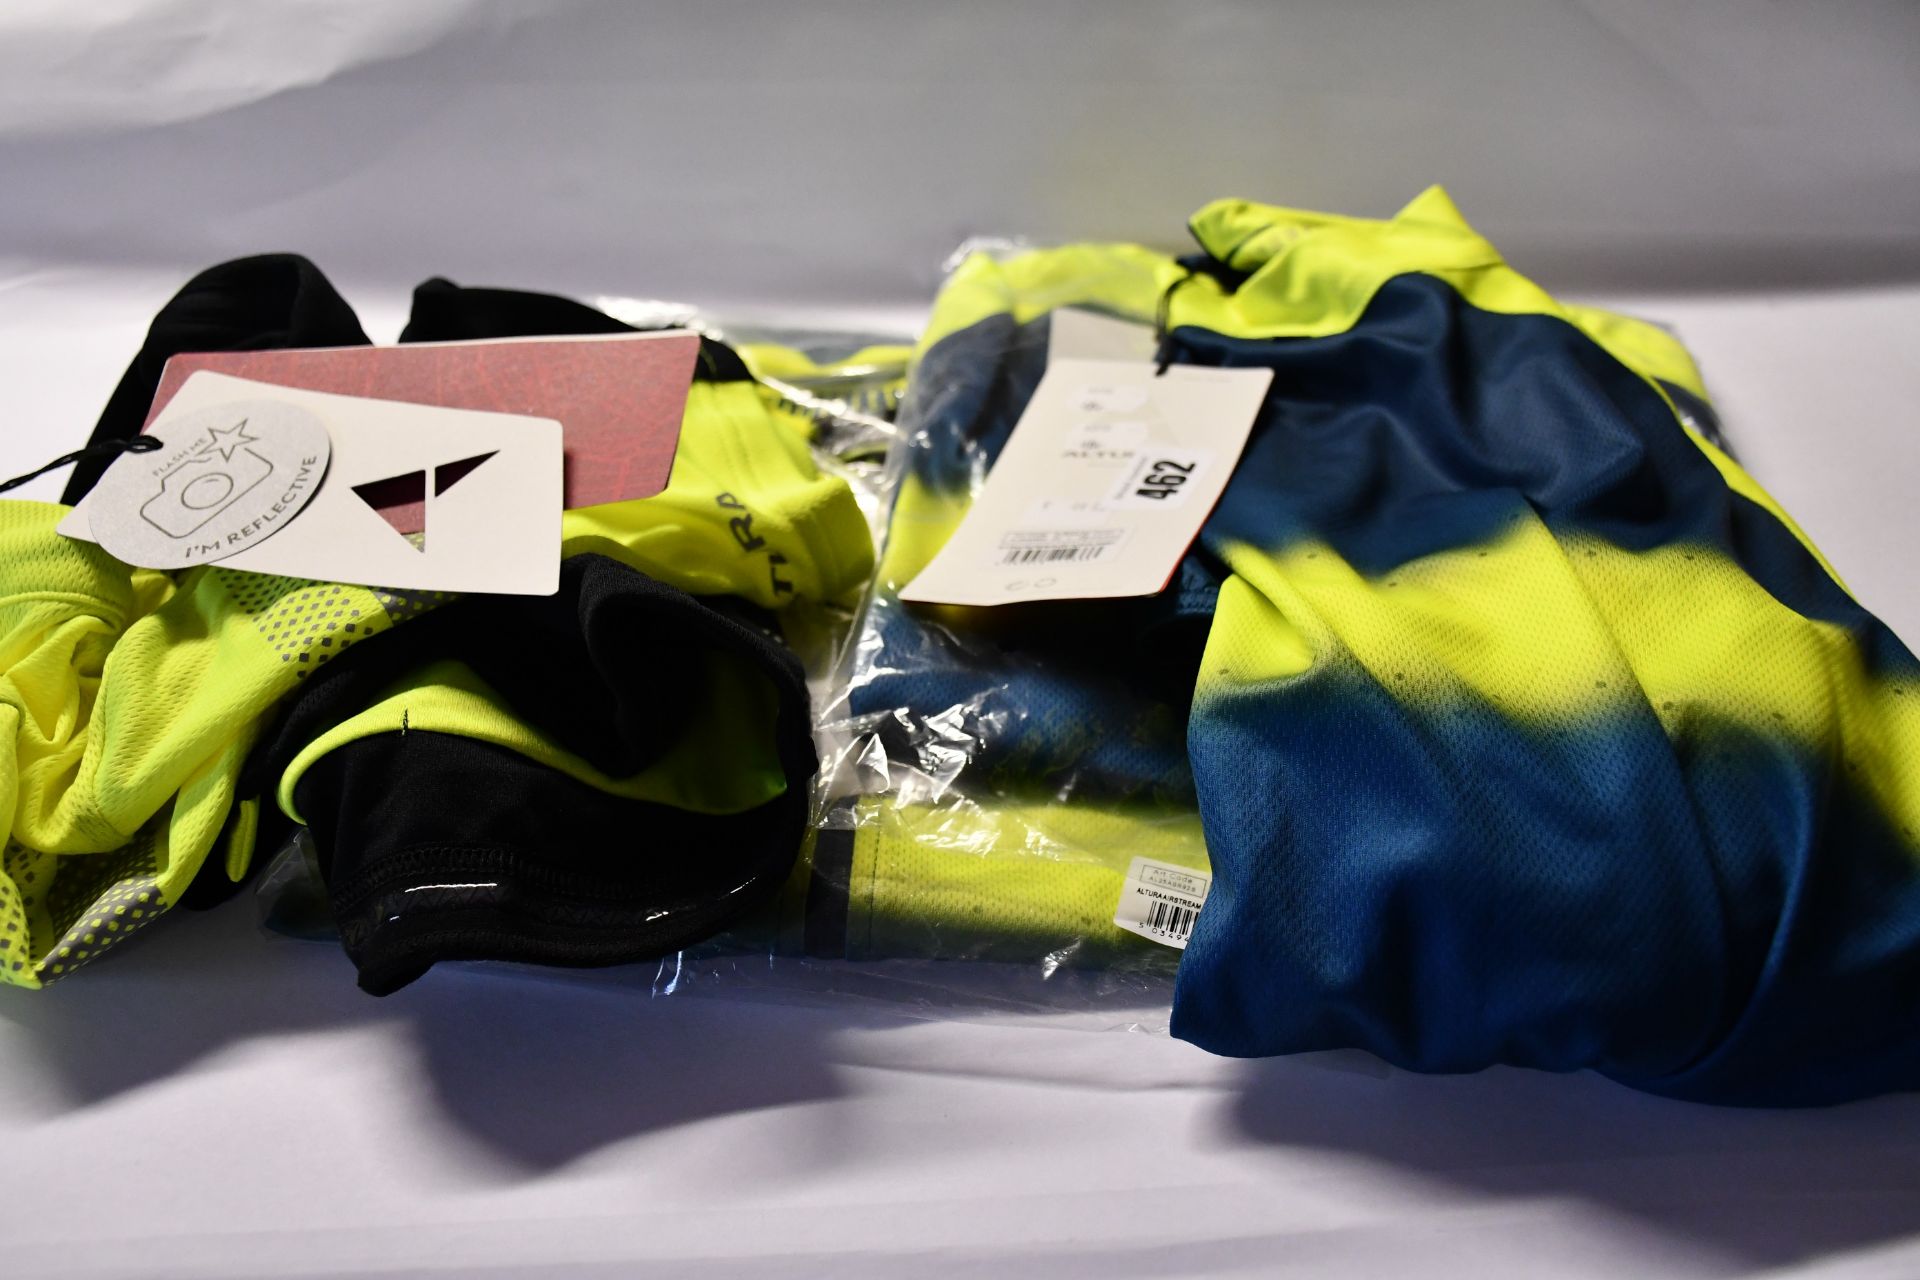 Four as new Altura cycling tops (S, M, L, XL - RRP £45-50 each).